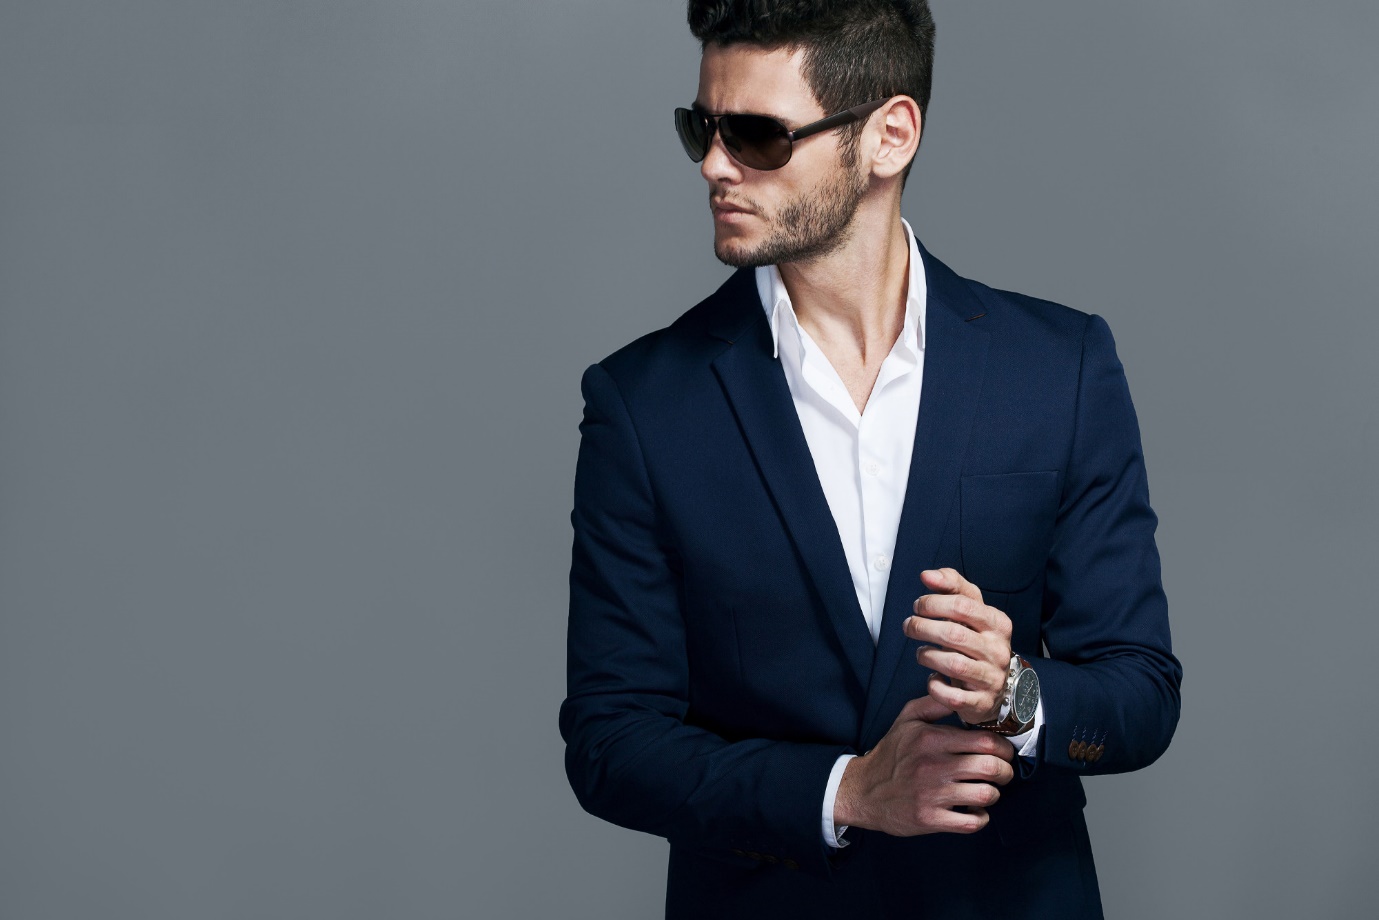 The Gentleman's Guide to Casual Fridays: Effortless Office Style